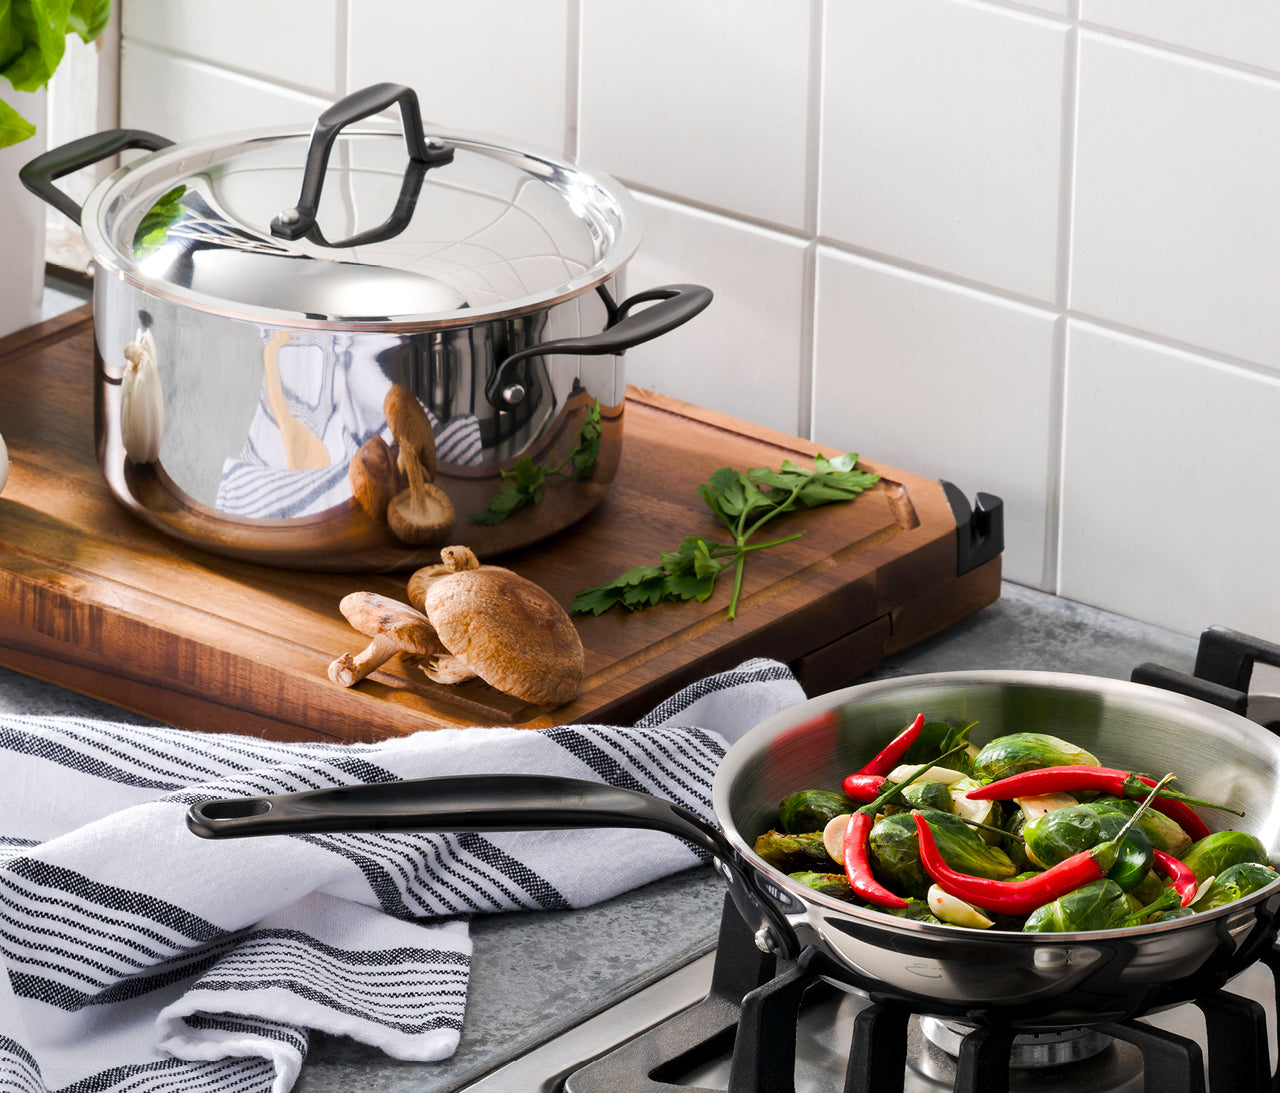 Legend Cookware Review - Stainless Steel Copper Core Set 